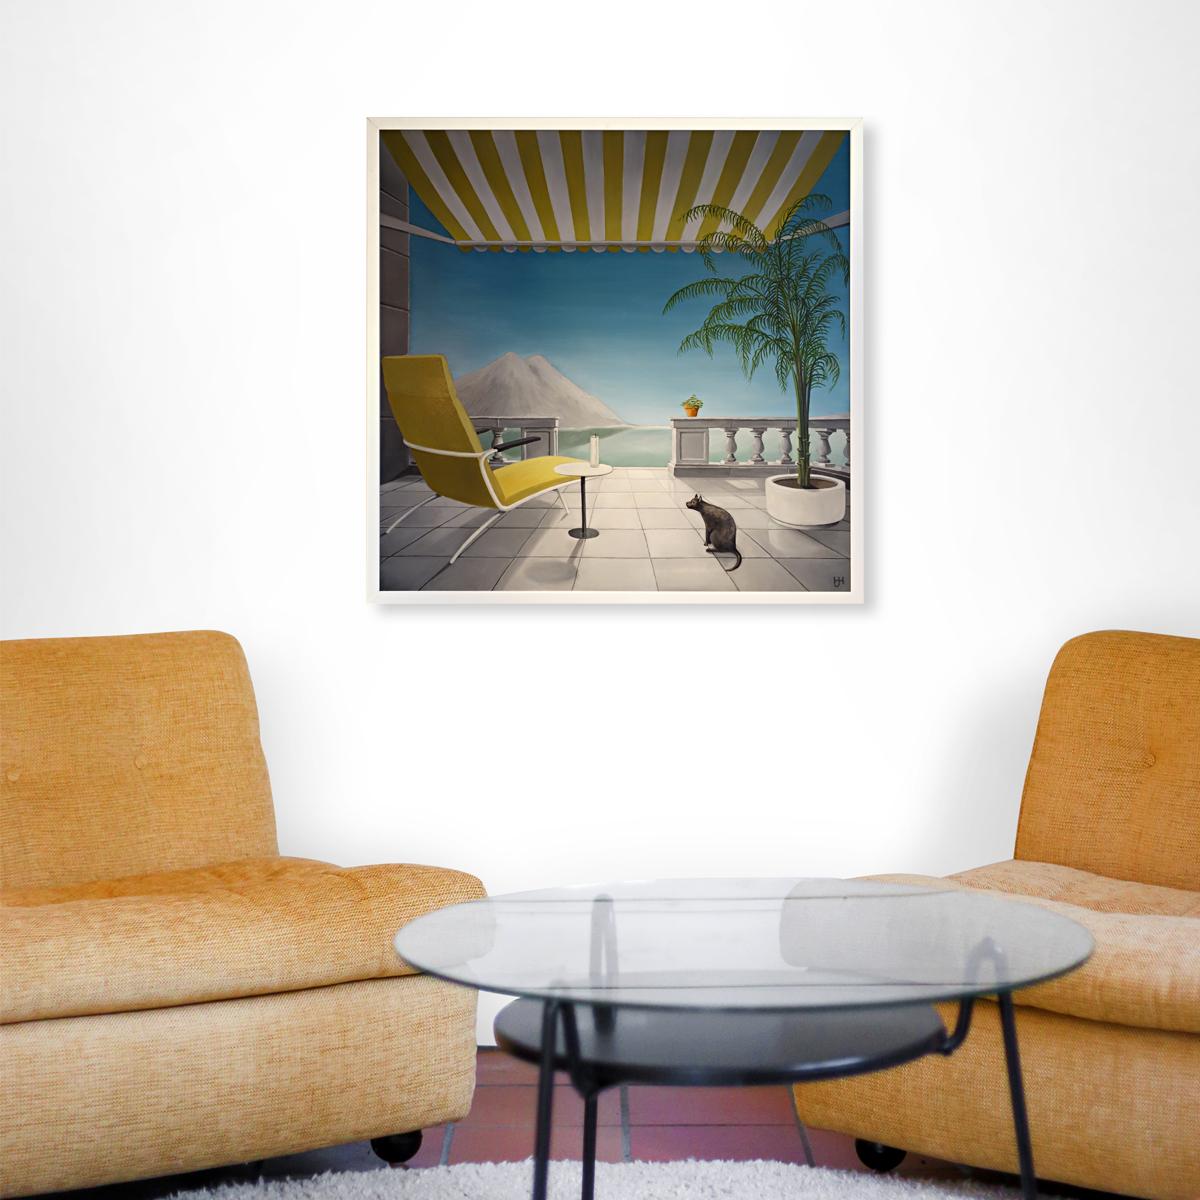 Beautifully detailed large painting by Jac. Haan, interior architect and former manager of the furniture department of the famous Dutch department store Metz en Co. 

The painting depicts a terrace by the ocean. It is a very relaxing and uplifting